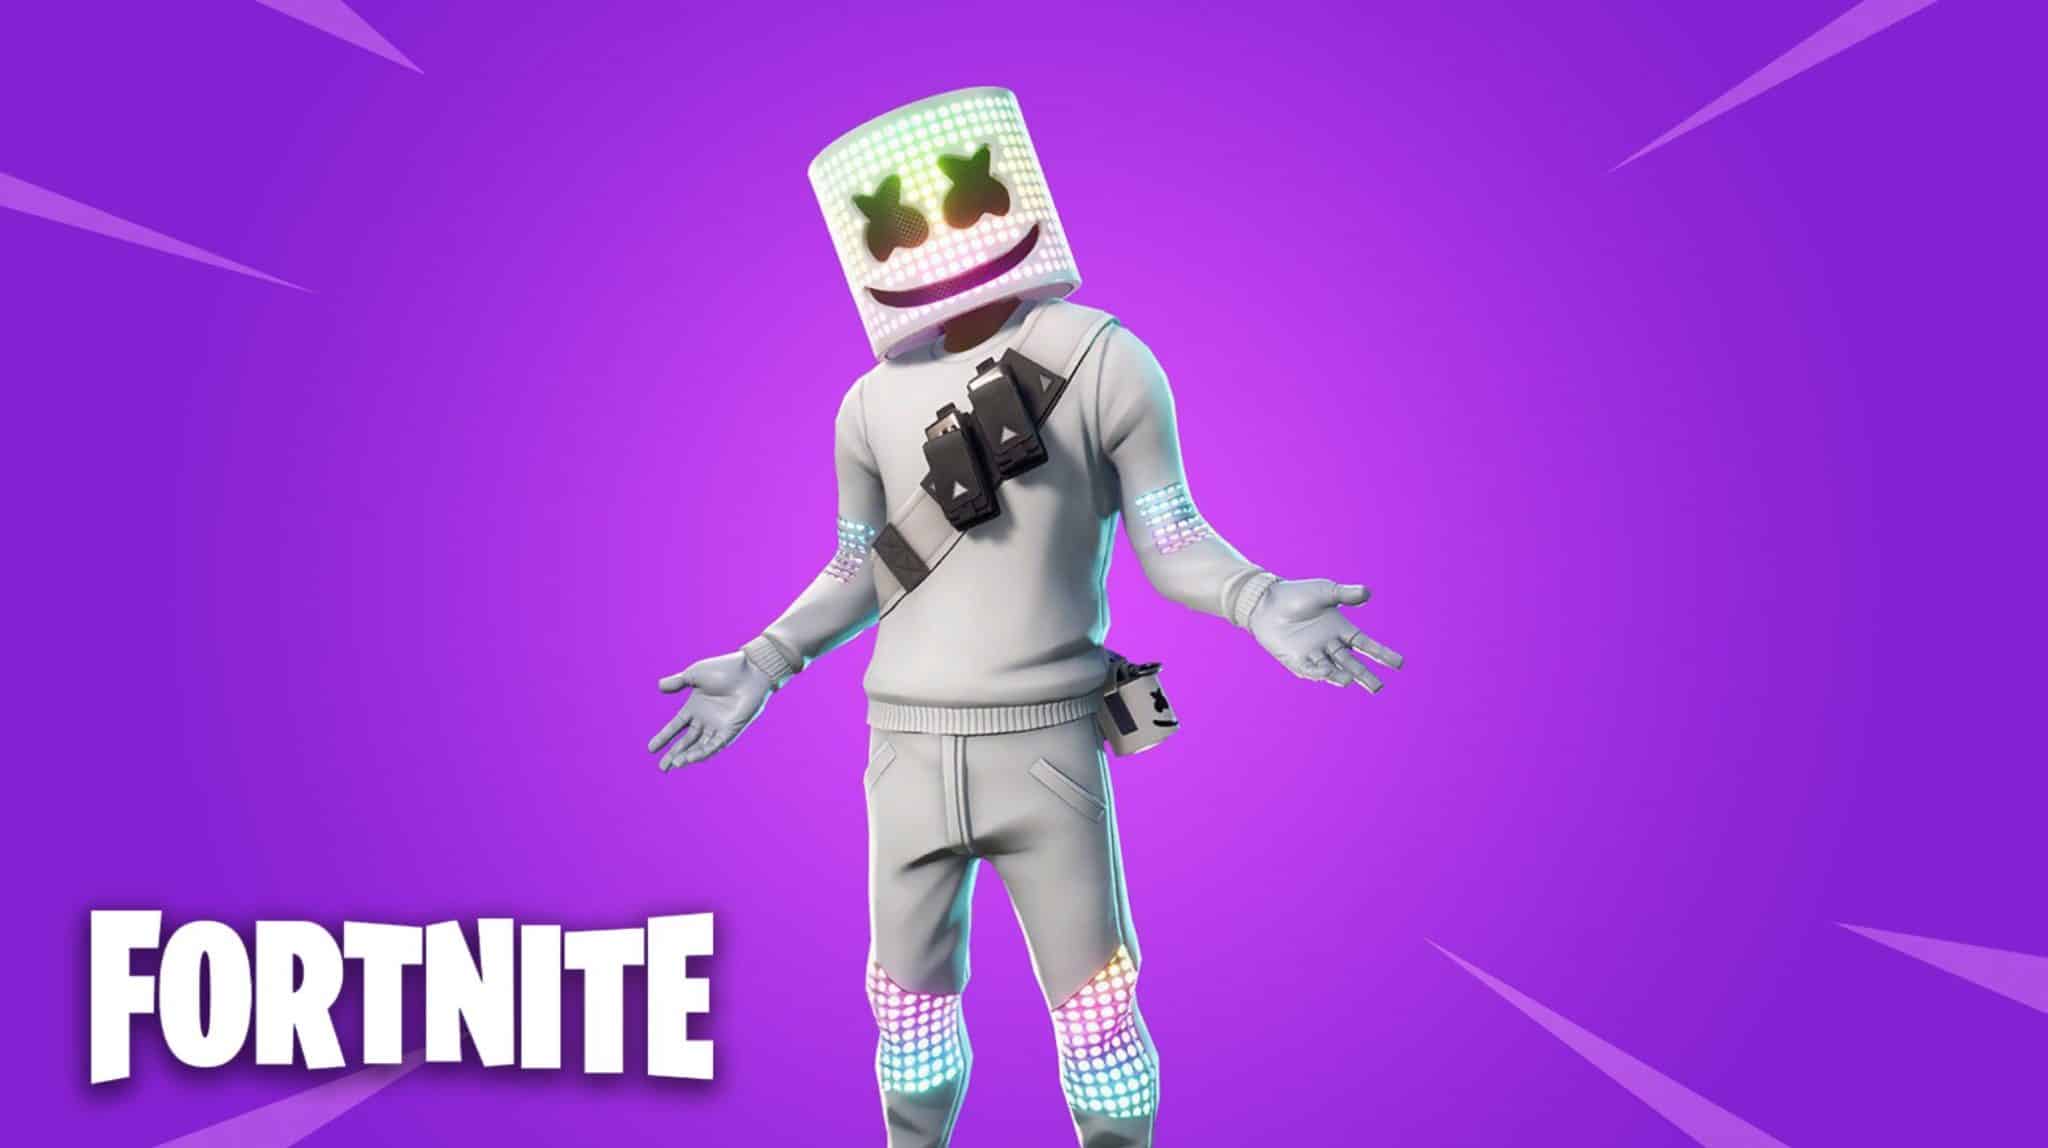 New Marshmello Skin Fortnite Coming to the Item Shop Soon